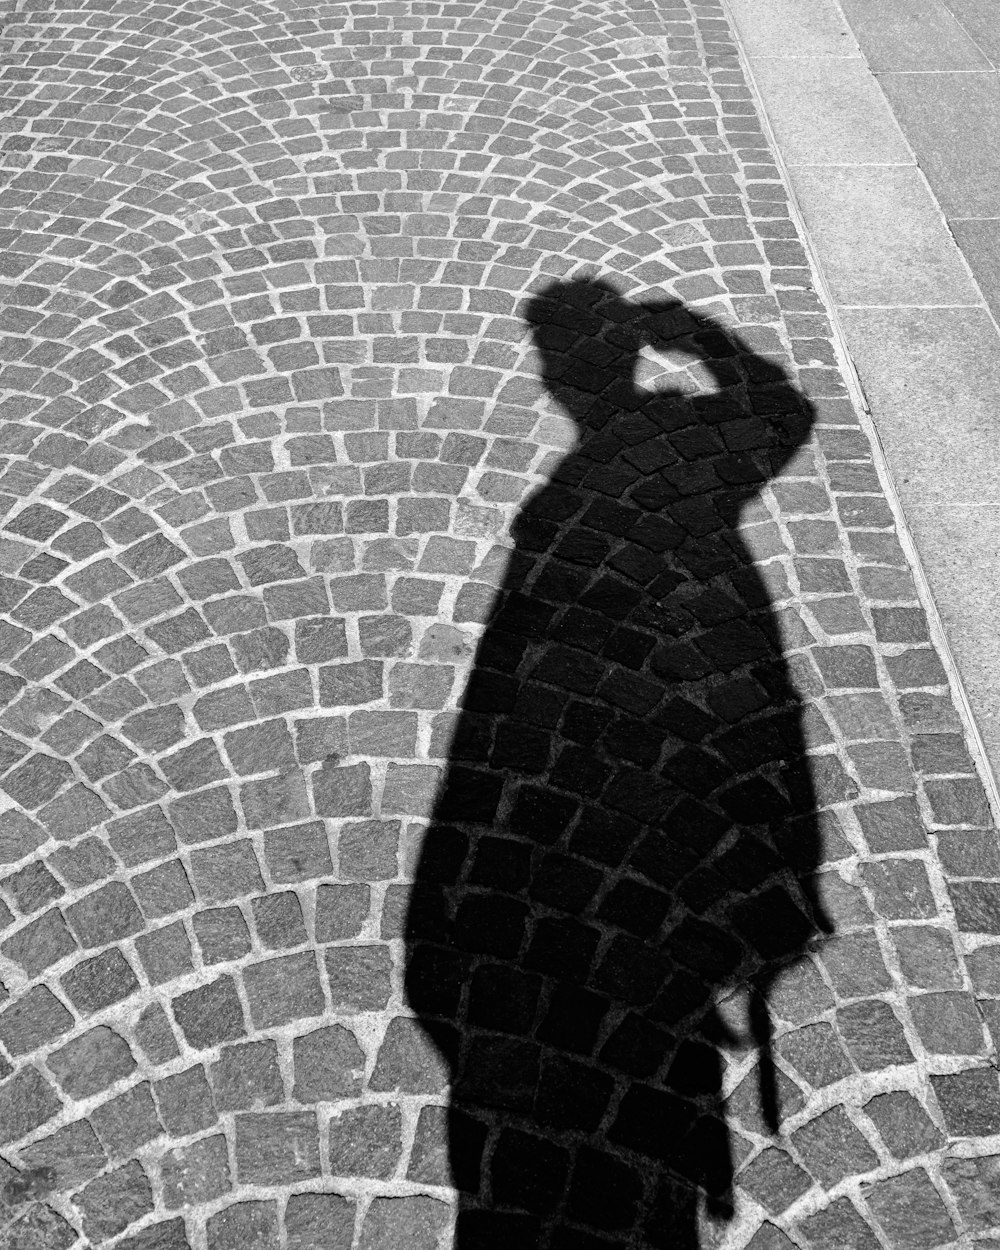 a shadow of a person on a cobblestone street